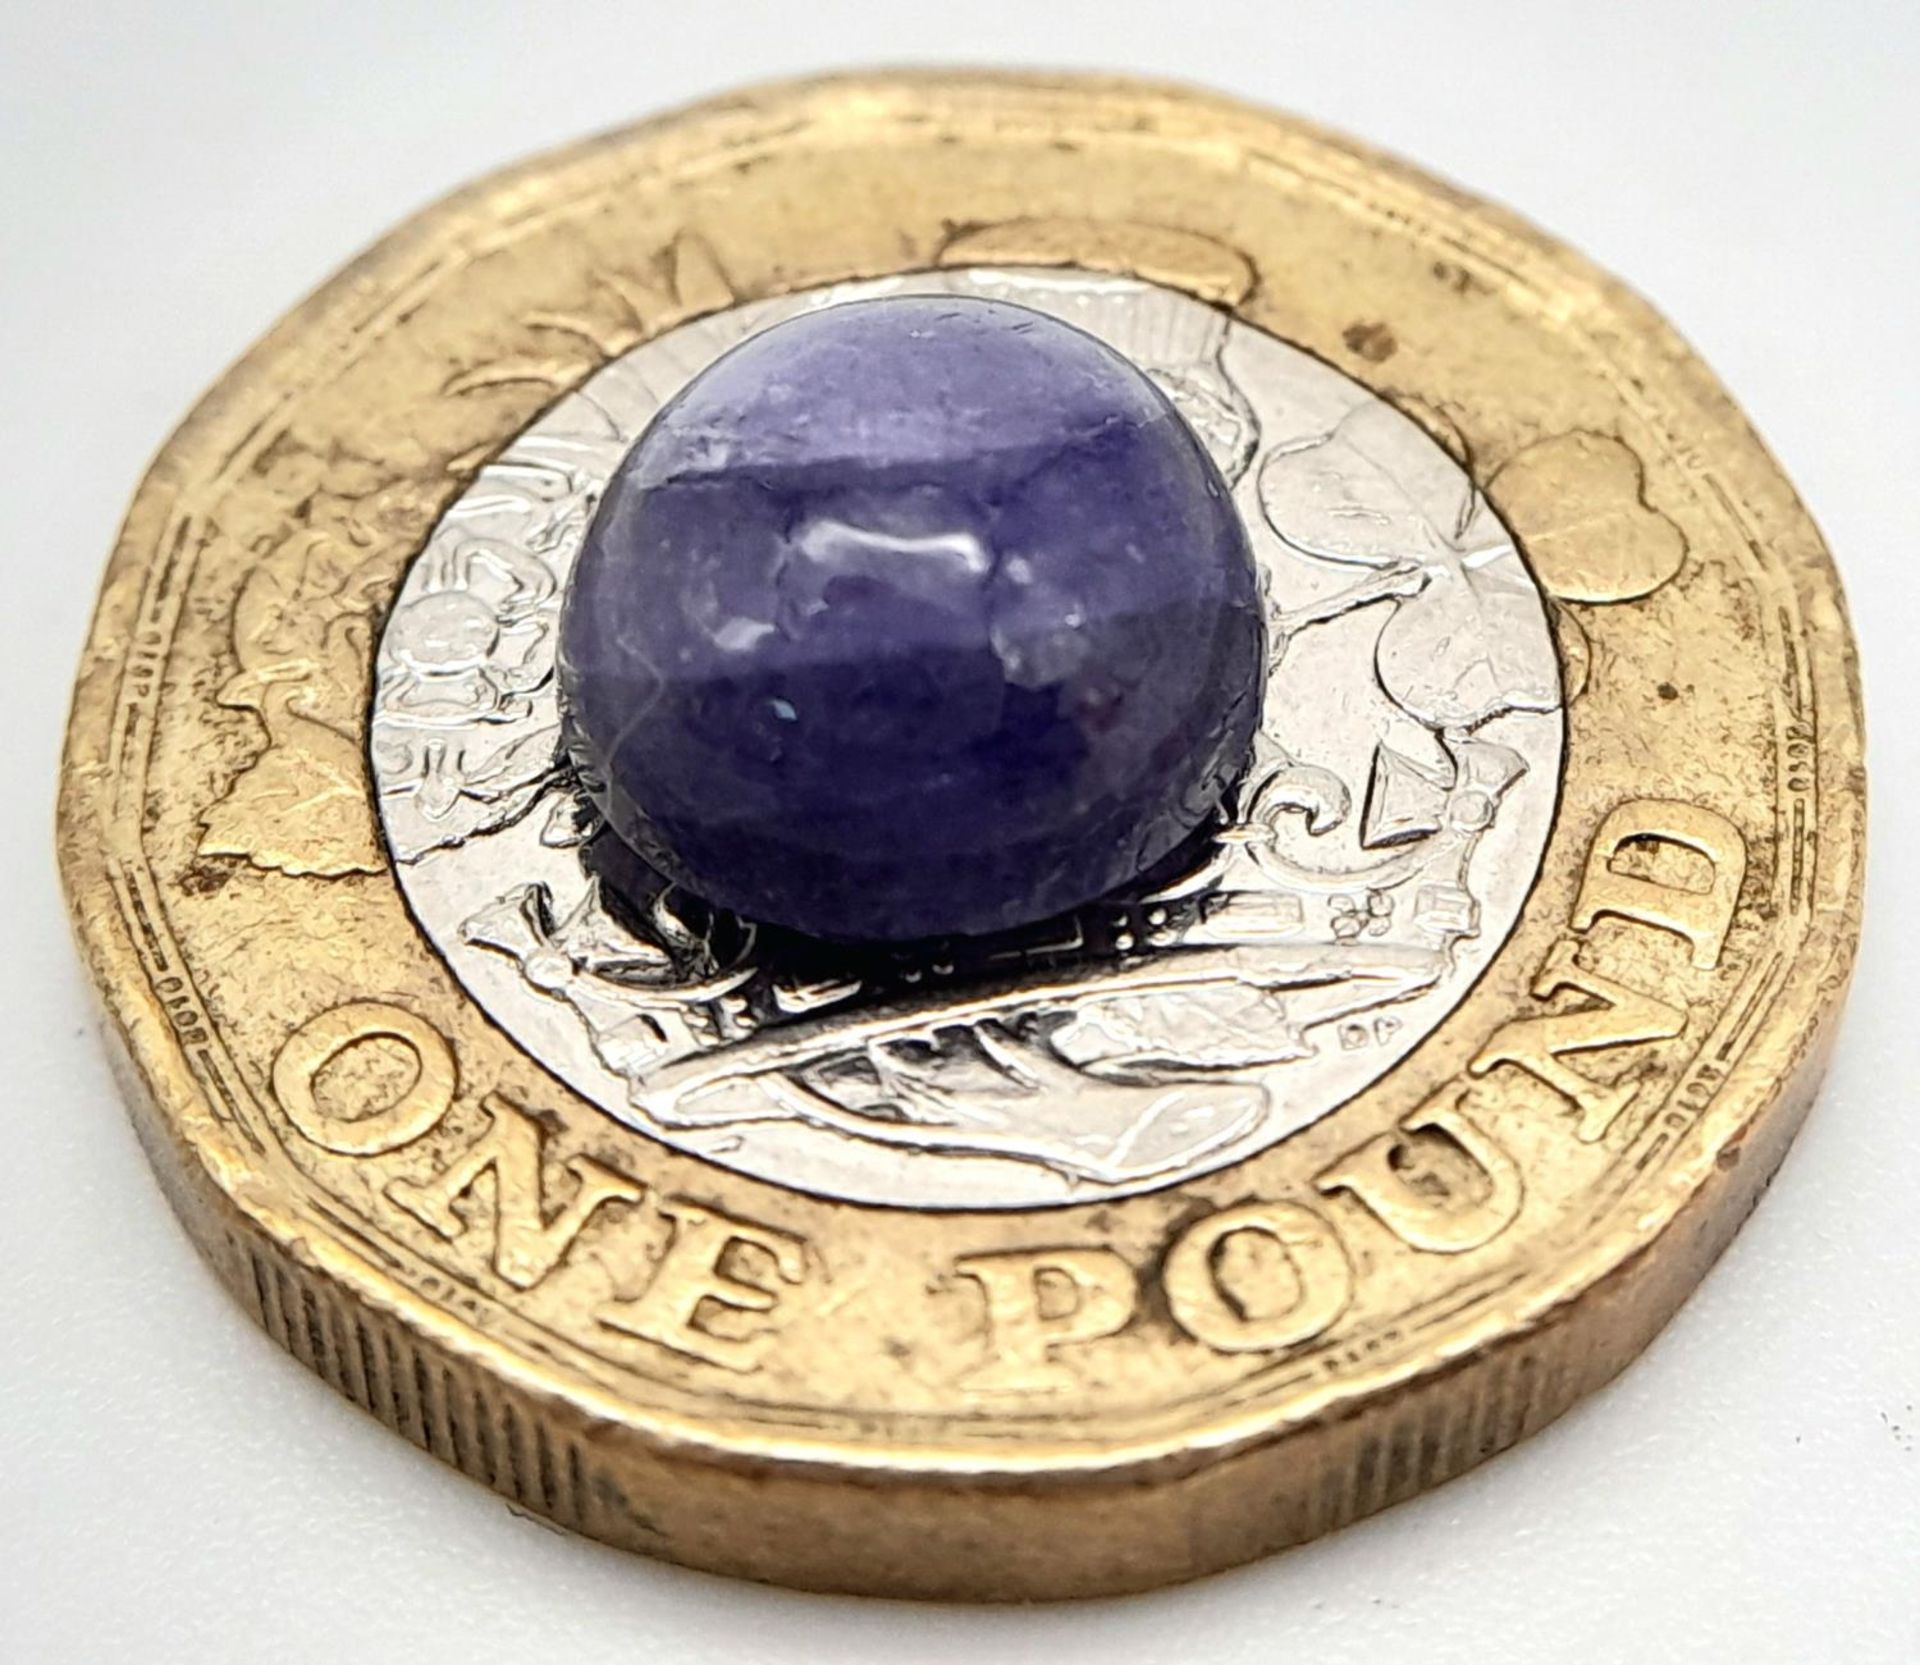 A 3.85ct Tanzanite Cabochon - GFCO Swiss Certified. - Image 3 of 4